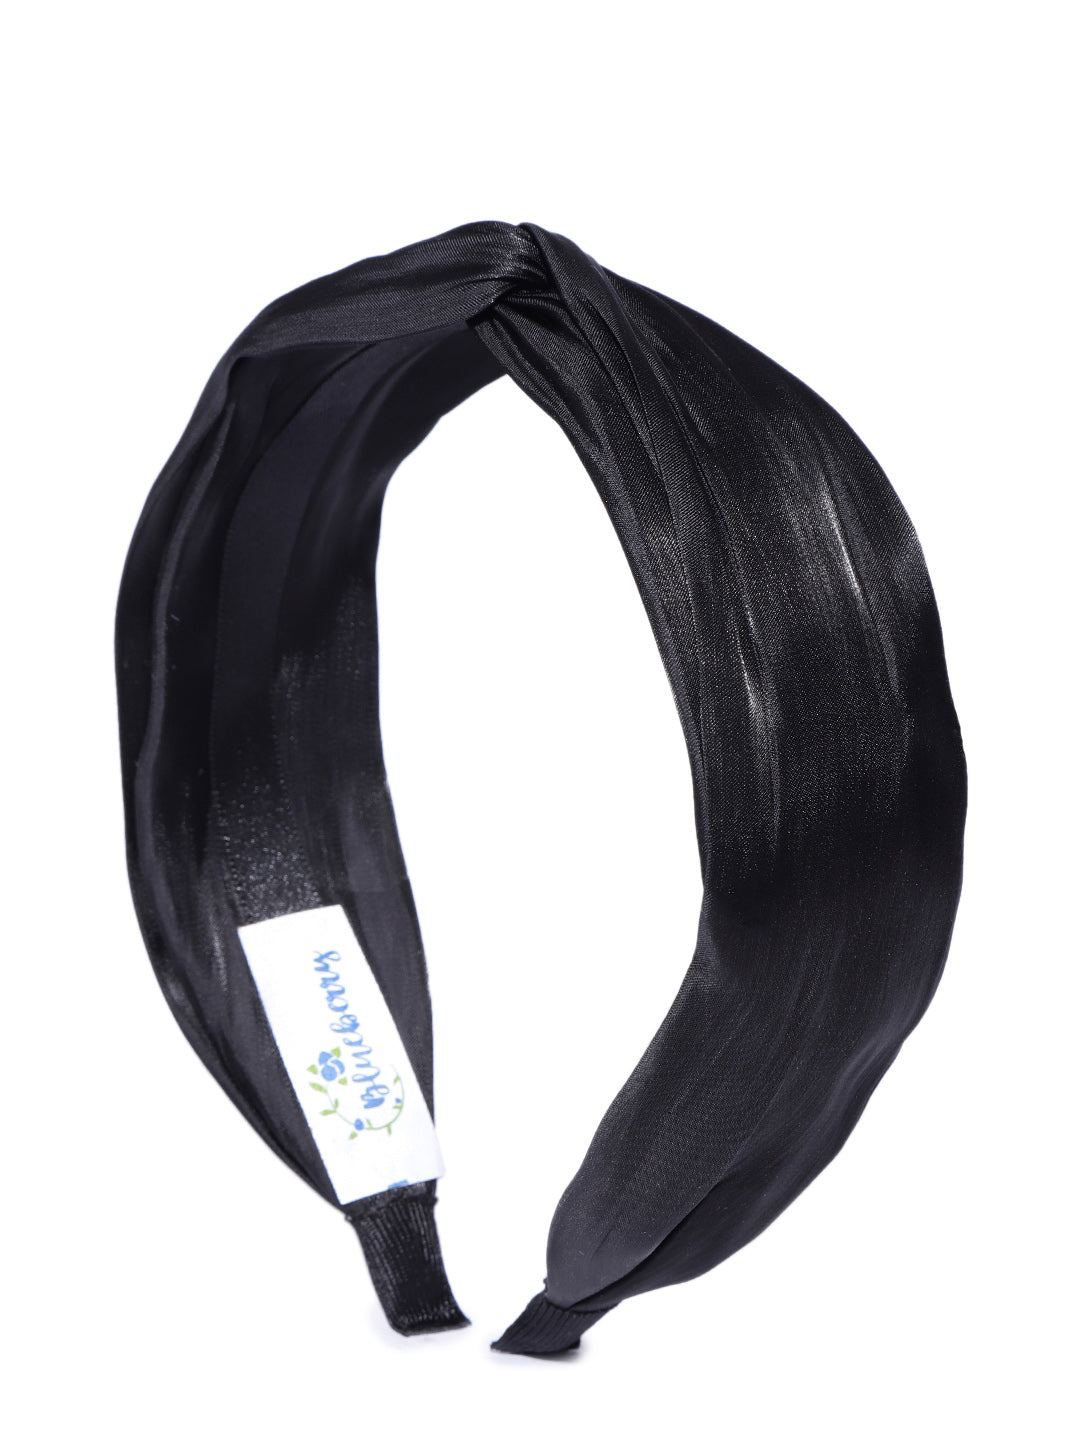 Blueberry Black pleated knot hairband